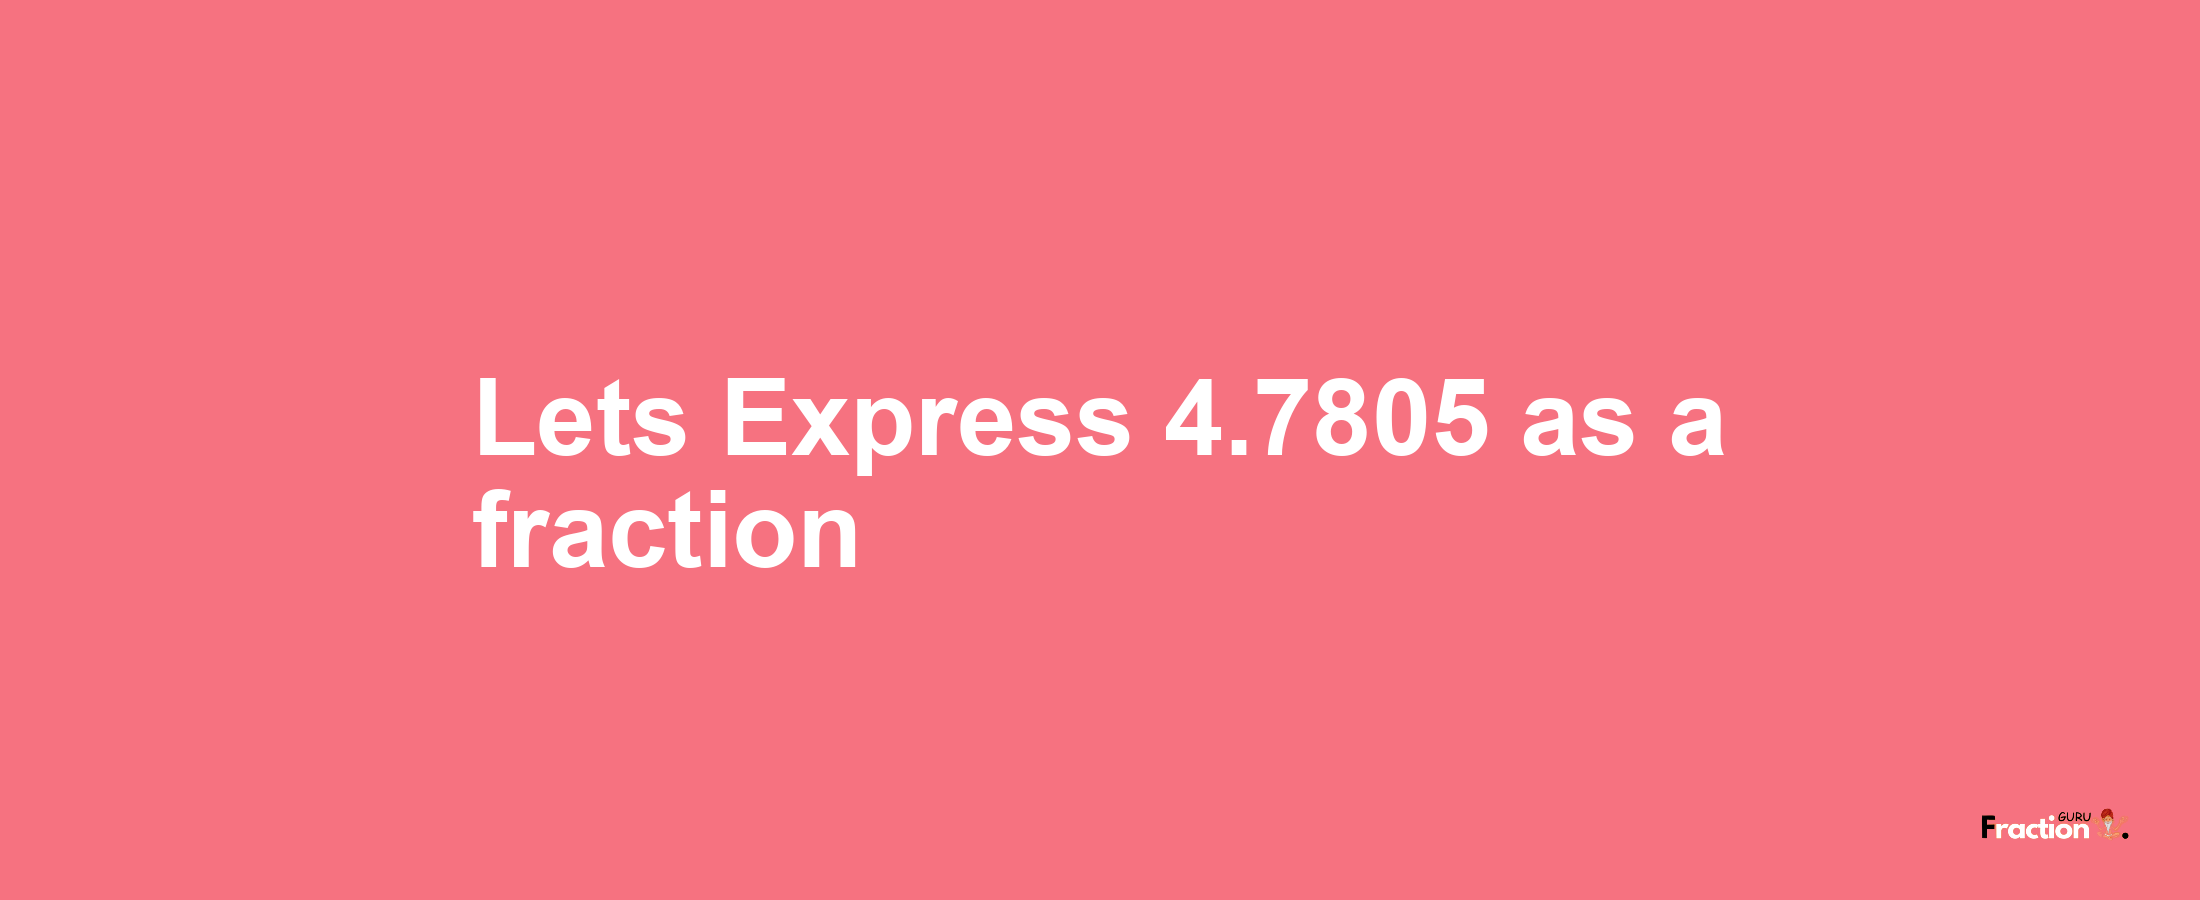 Lets Express 4.7805 as afraction